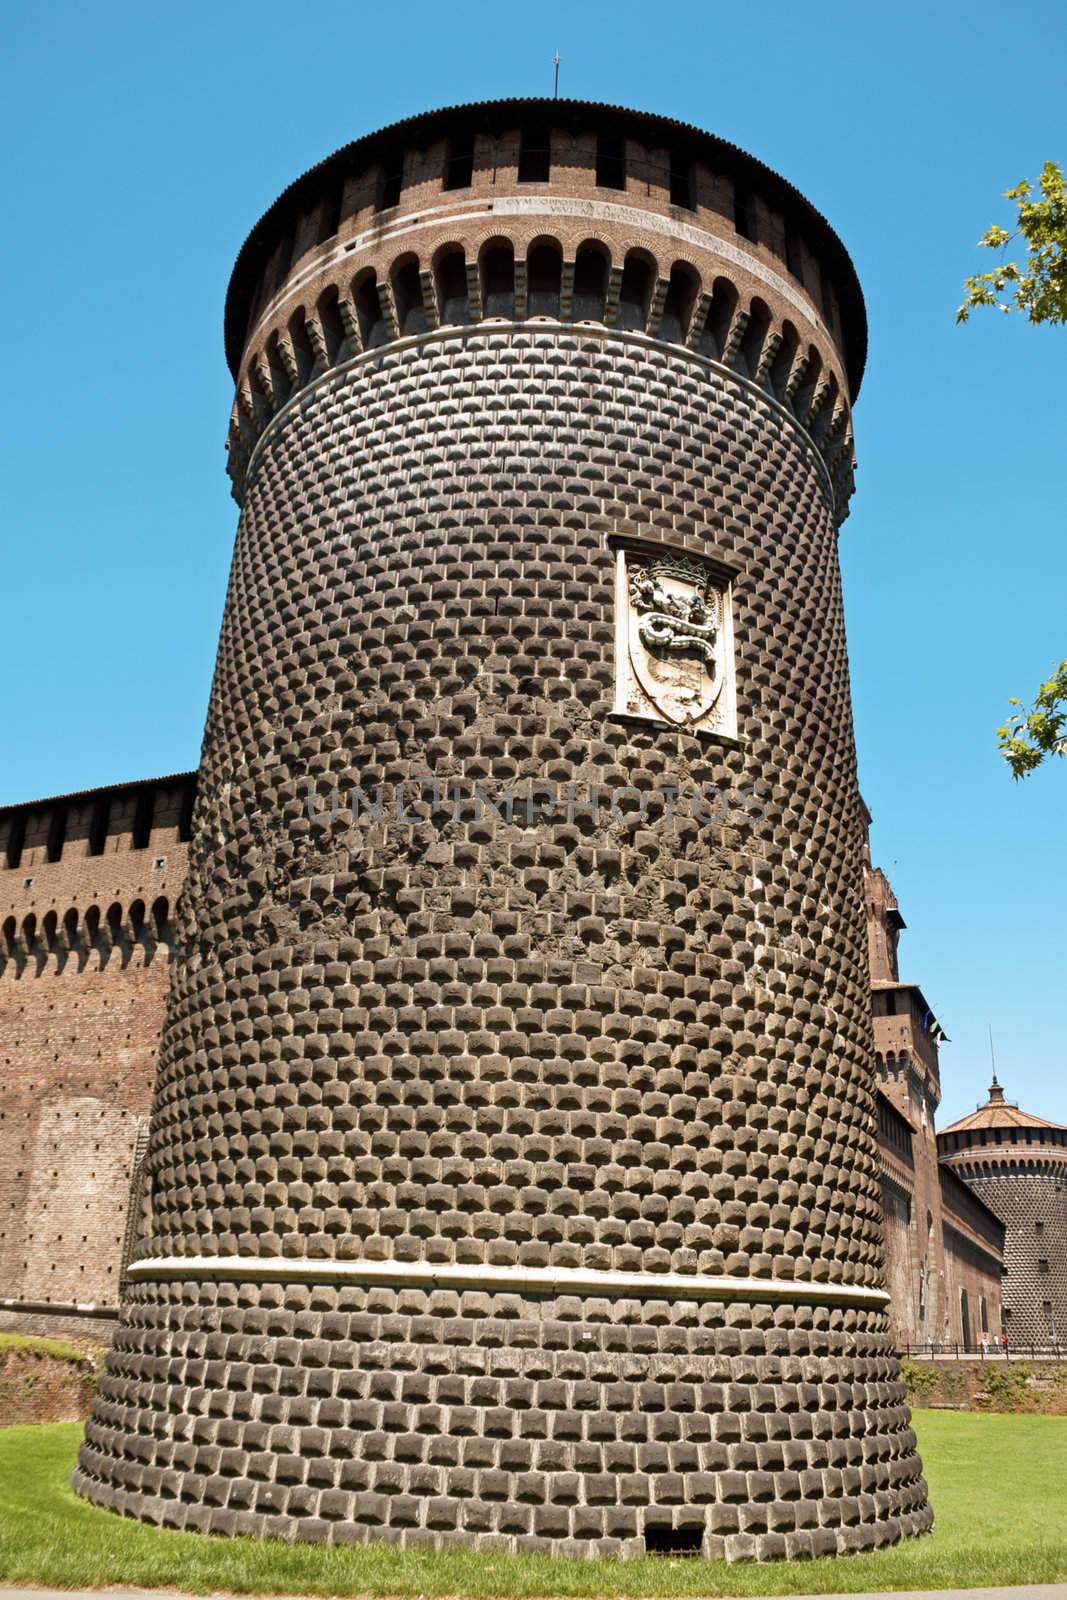 Close-up of one of the cylindrical towers of the Castello Sforzesco in downtown Milan. The Castle was named after Francesco Sforza, who transformed it into a ducal residence in 1450. But its origins date back to the second half of the 14th century, at the time of Galeazzo II Visconti.